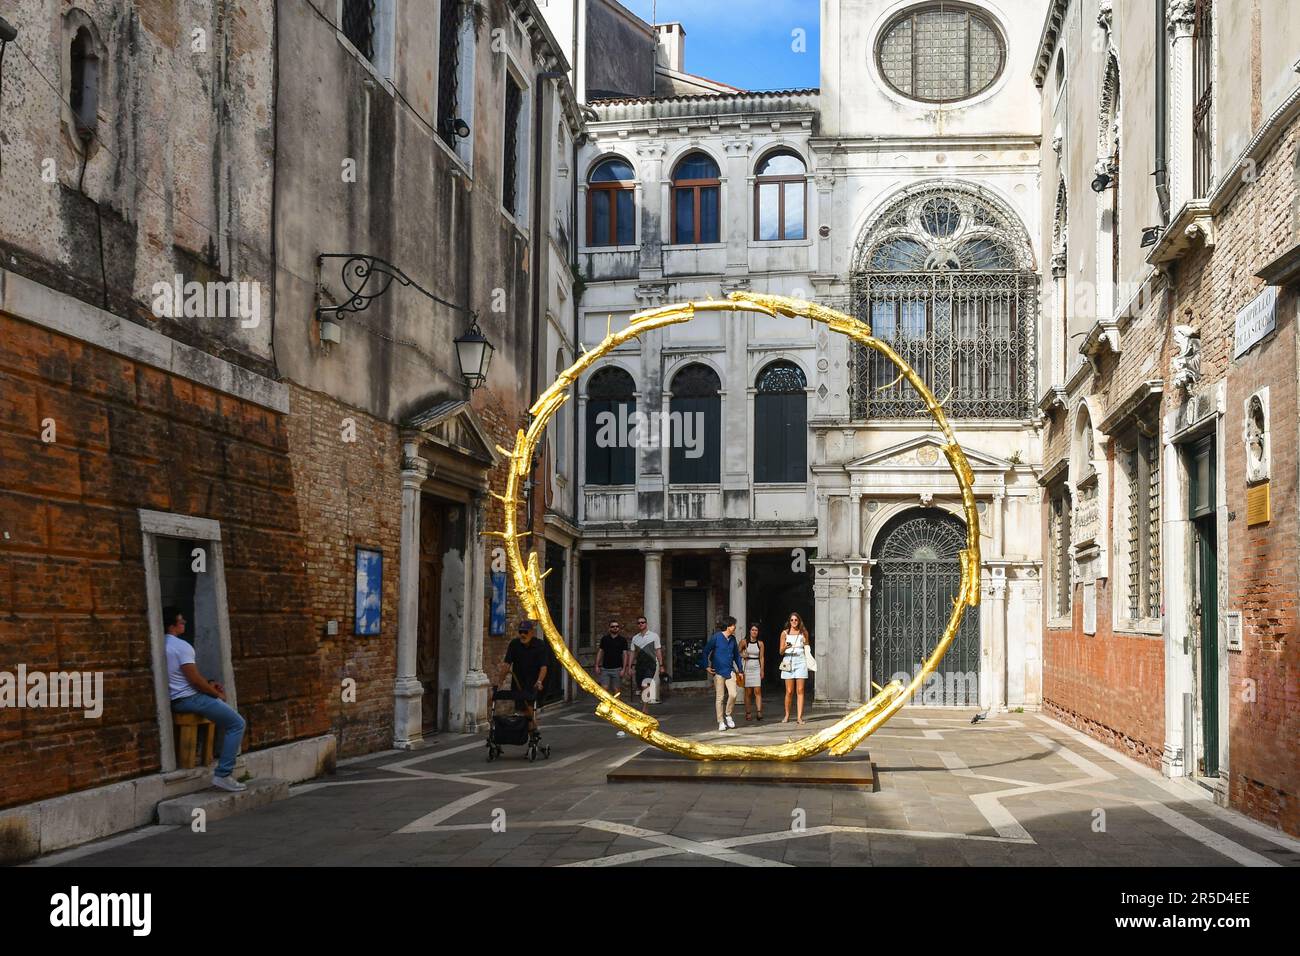 Court yard of the Scuola Grande di San Giovanni Evangelista (San Polo district) with the sculpture 'The sun' by the Swiss artist Ugo Rondinone, Venice Stock Photo